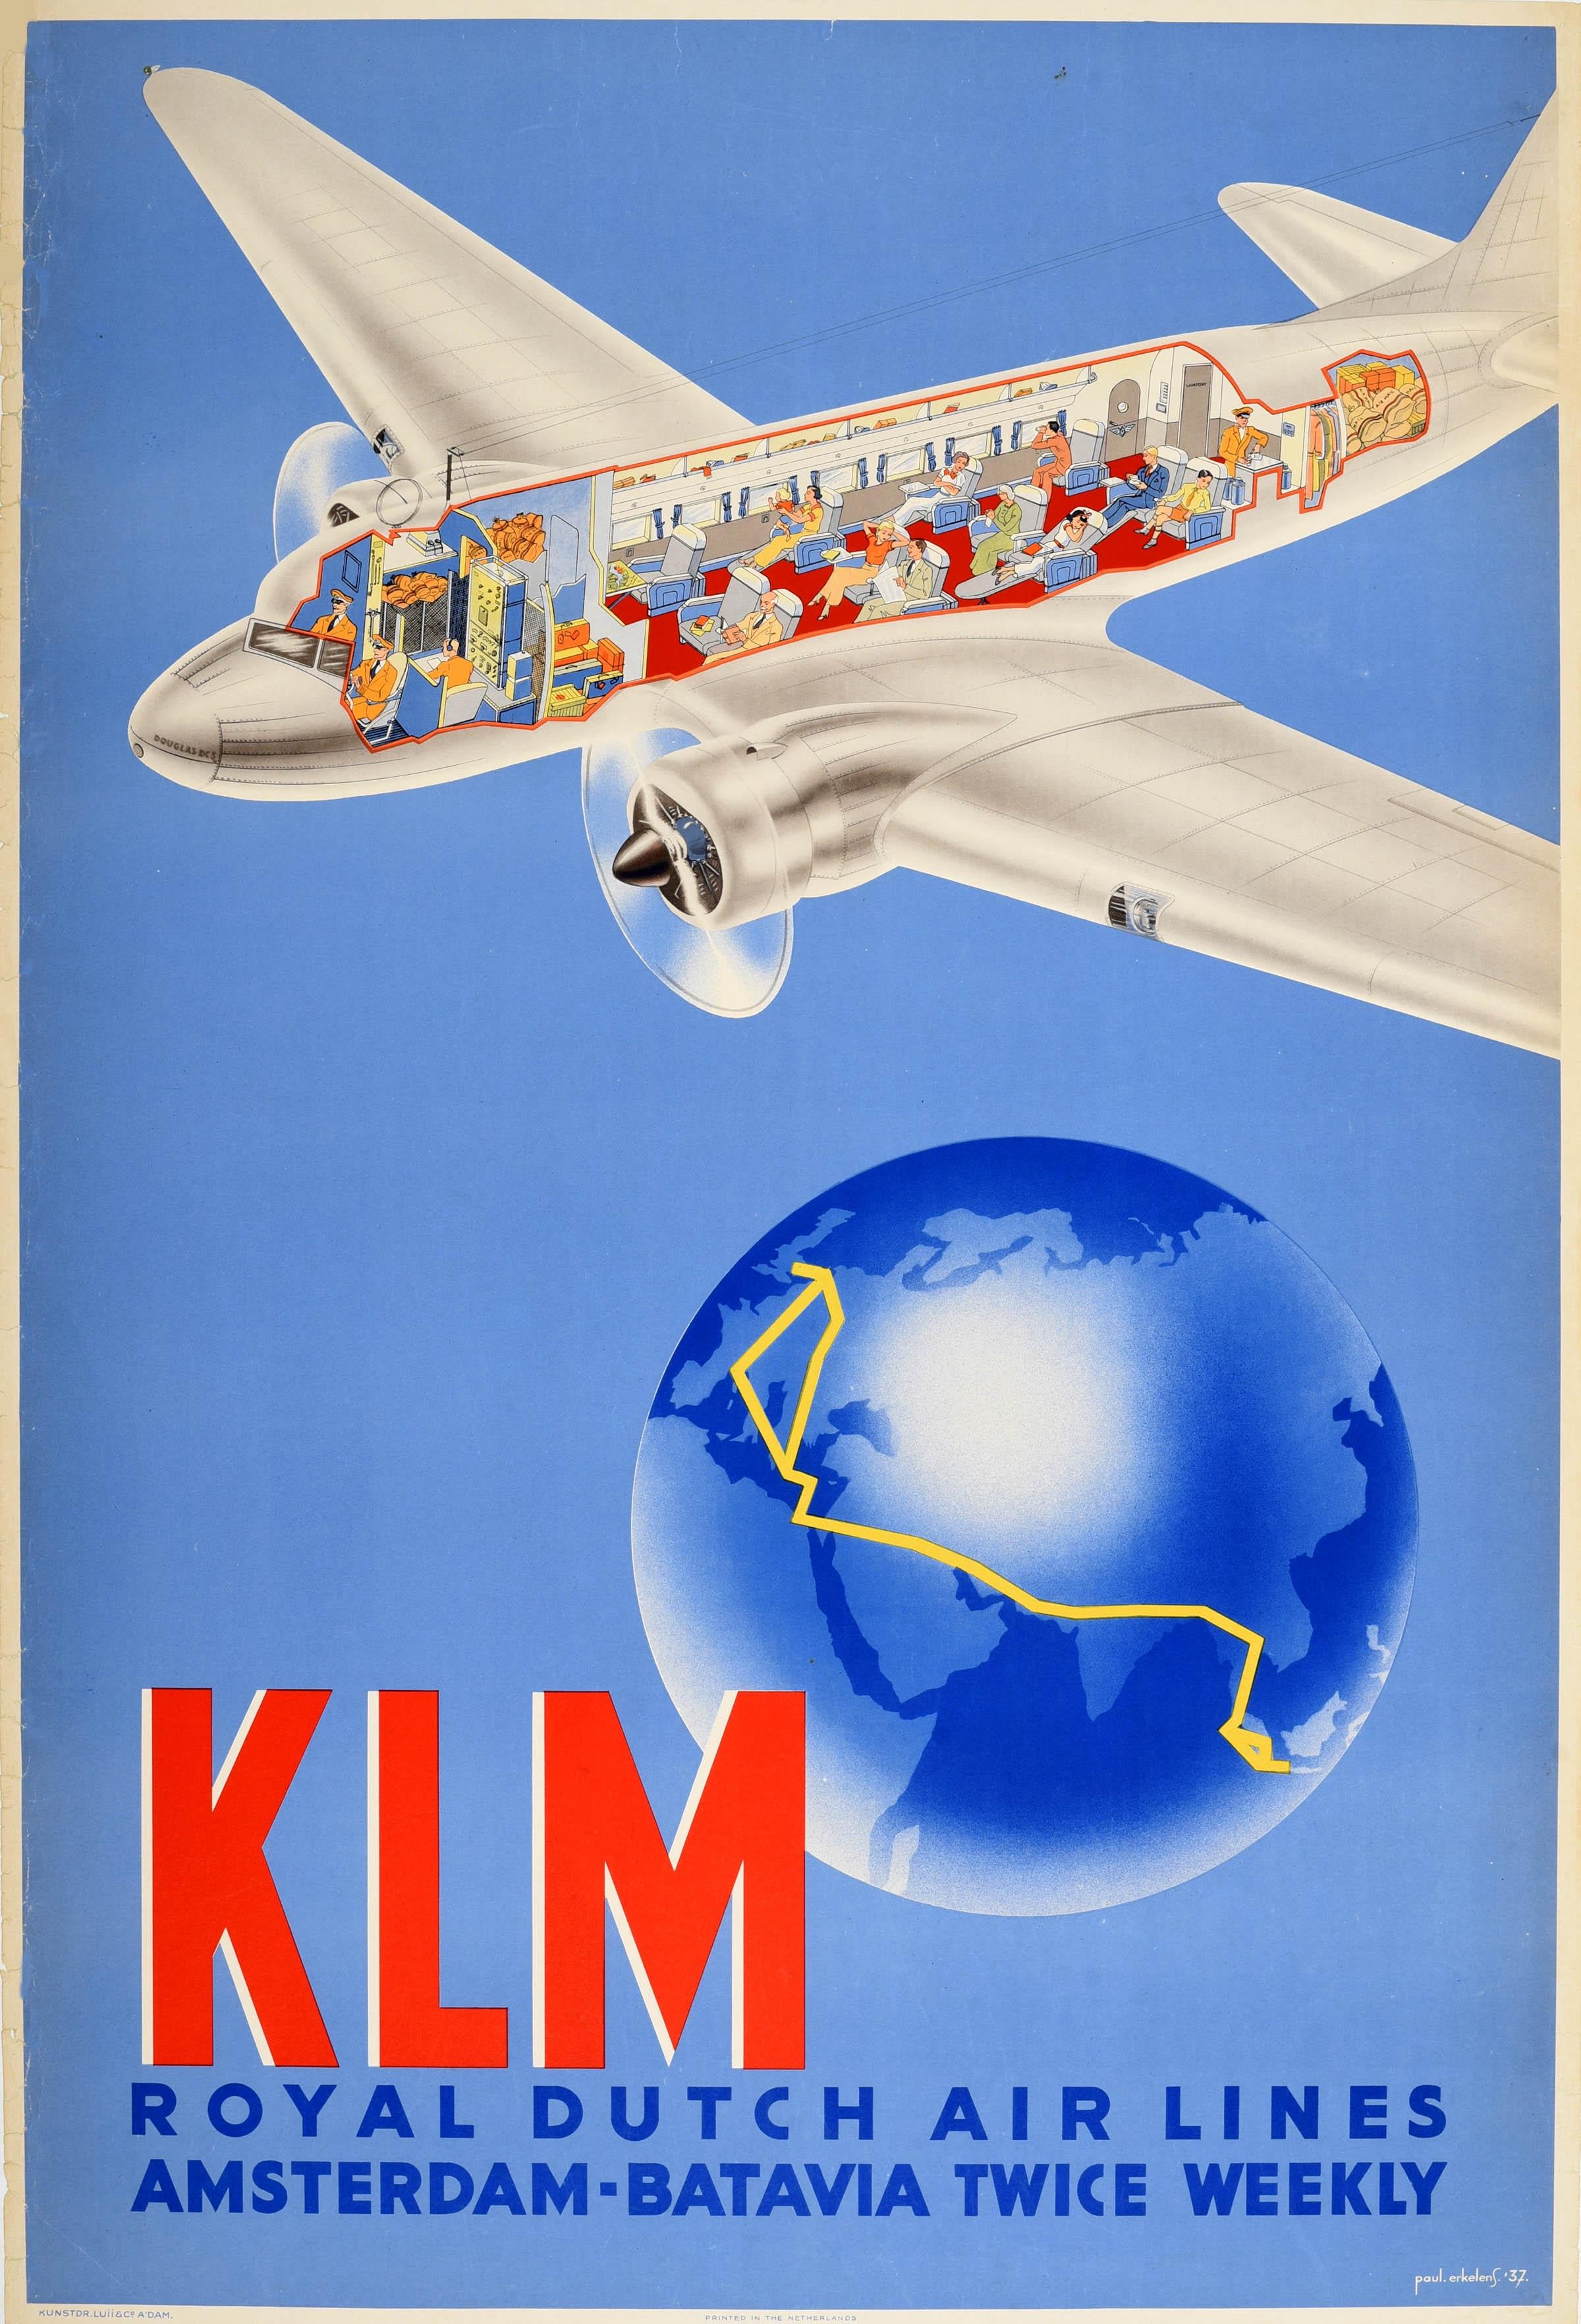 Original vintage travel advertising poster for KLM Royal Dutch Air Lines Amsterdam Batavia Twice Weekly featuring a great design depicting a cutaway of a Douglas DC-3 propeller plane showing passengers relaxing on comfortable reclining seats with